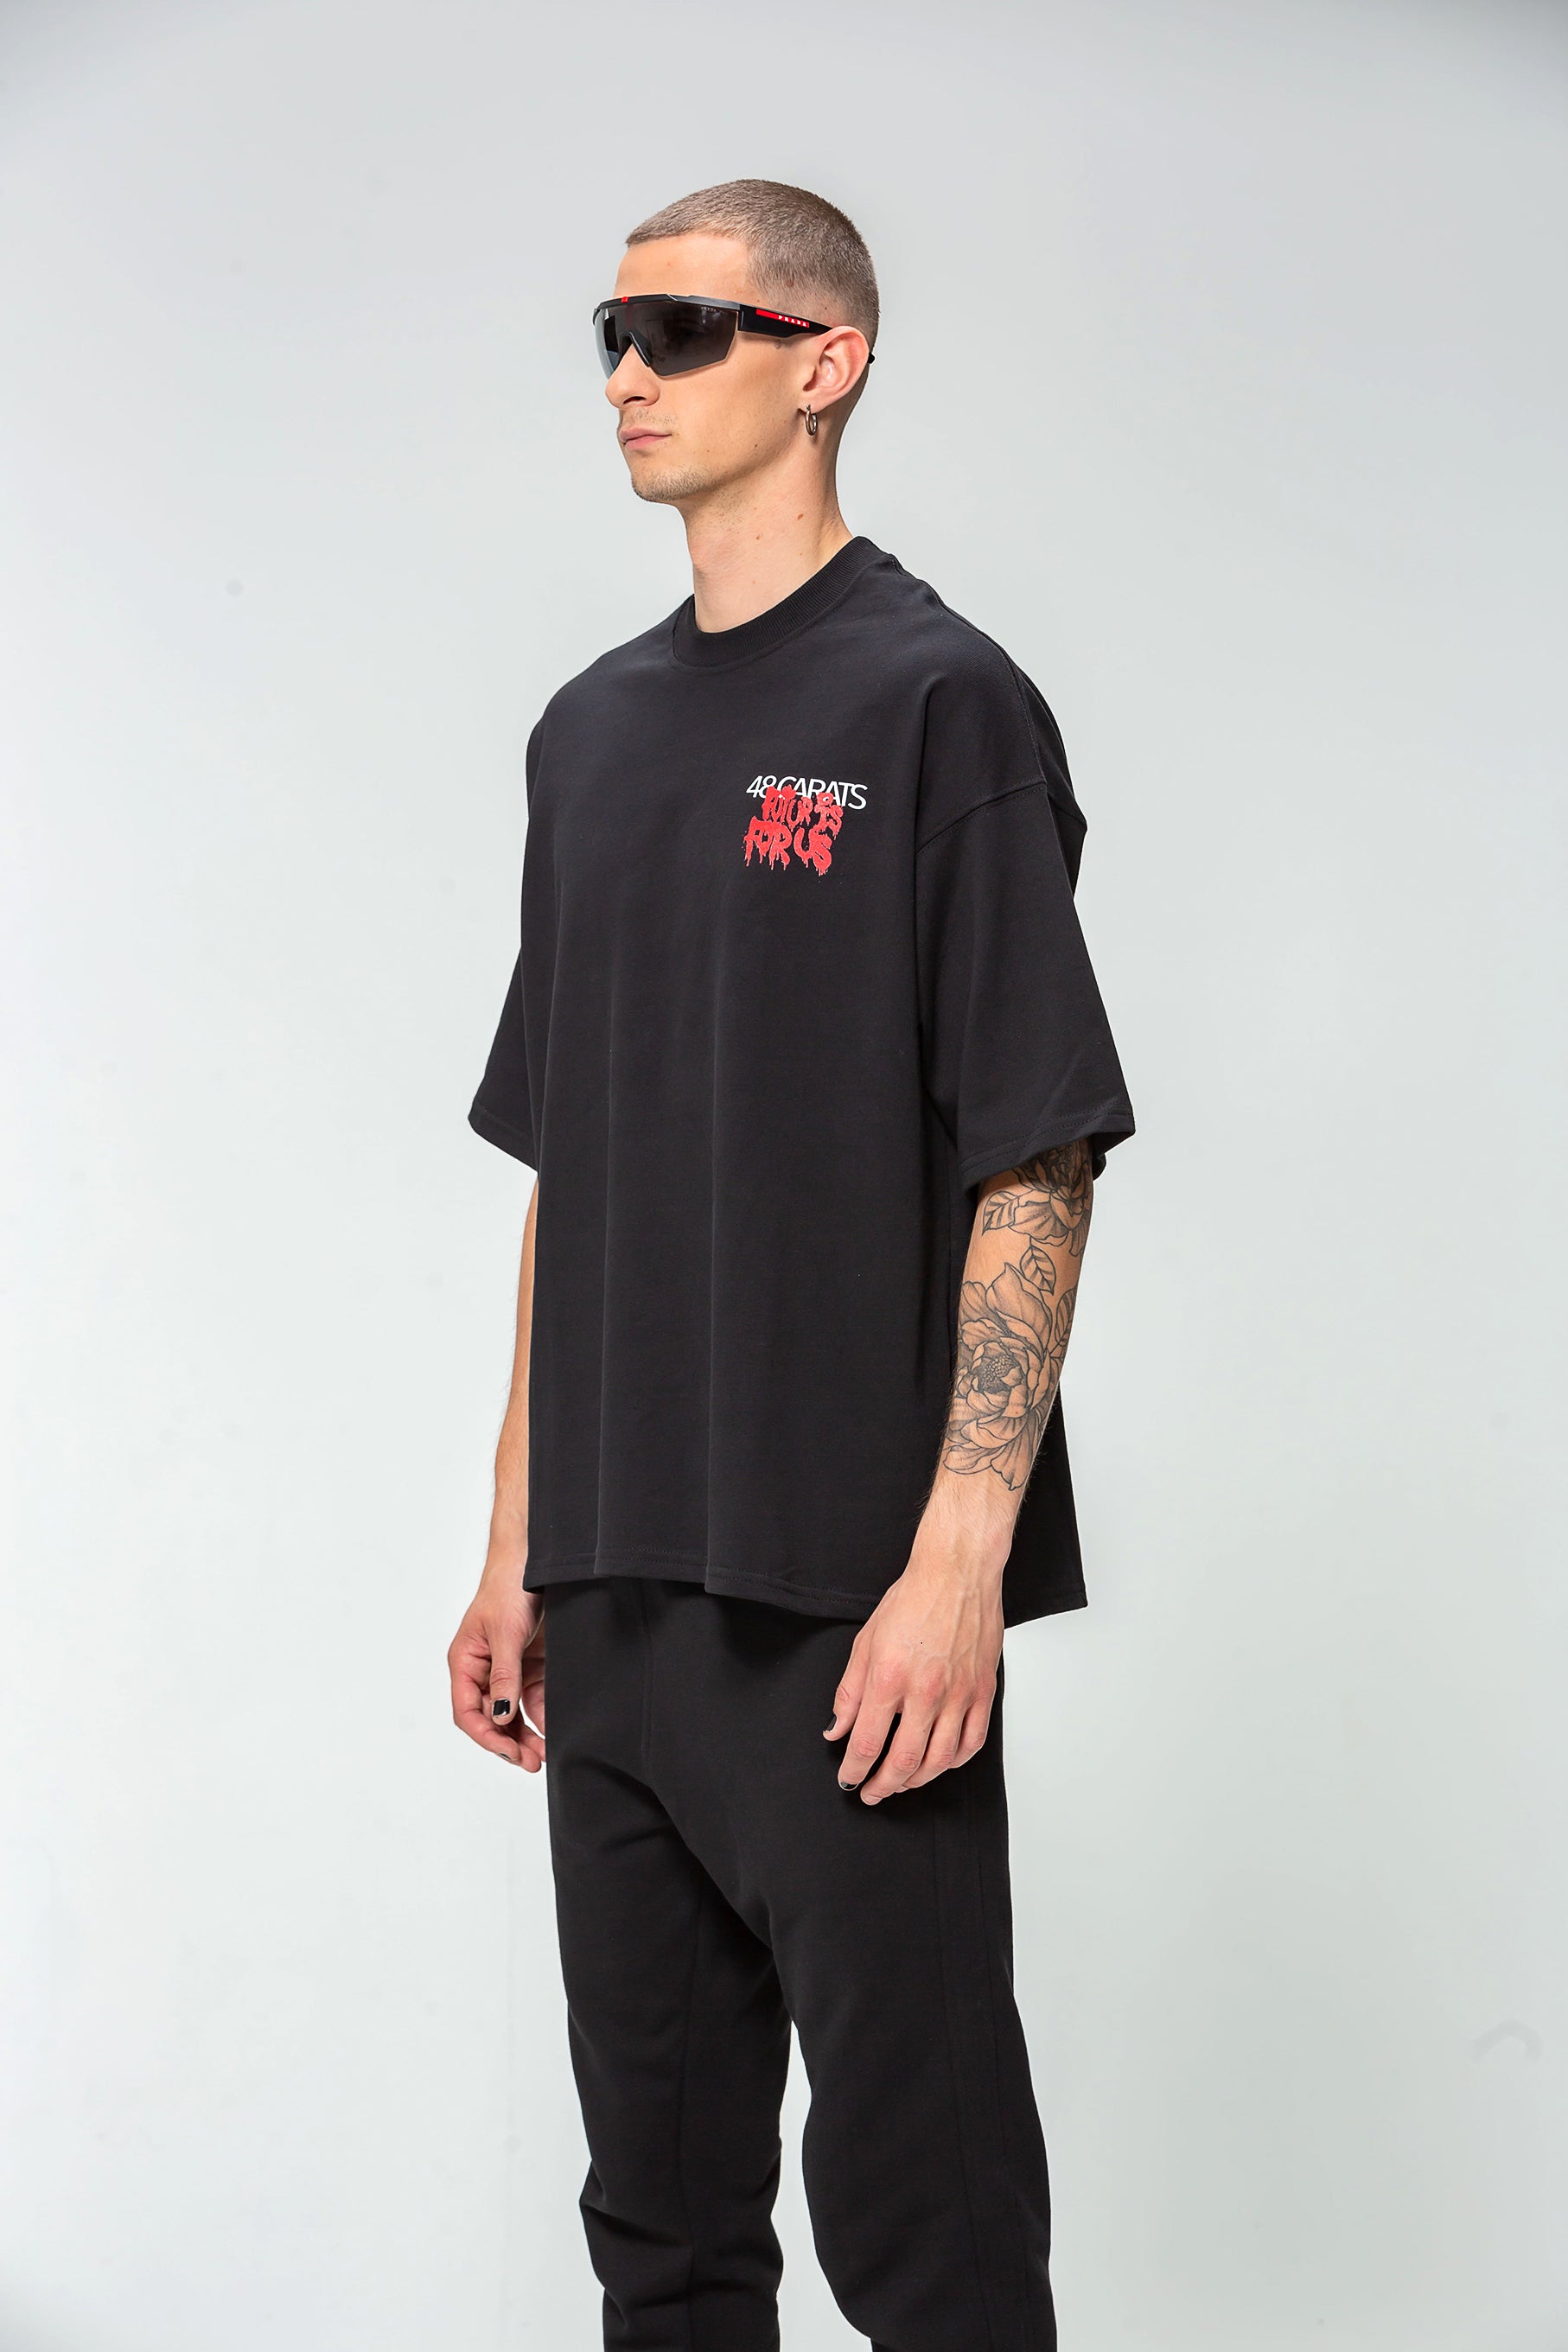 The World Is Yours 48 Carats Black Oversized T-Shirt